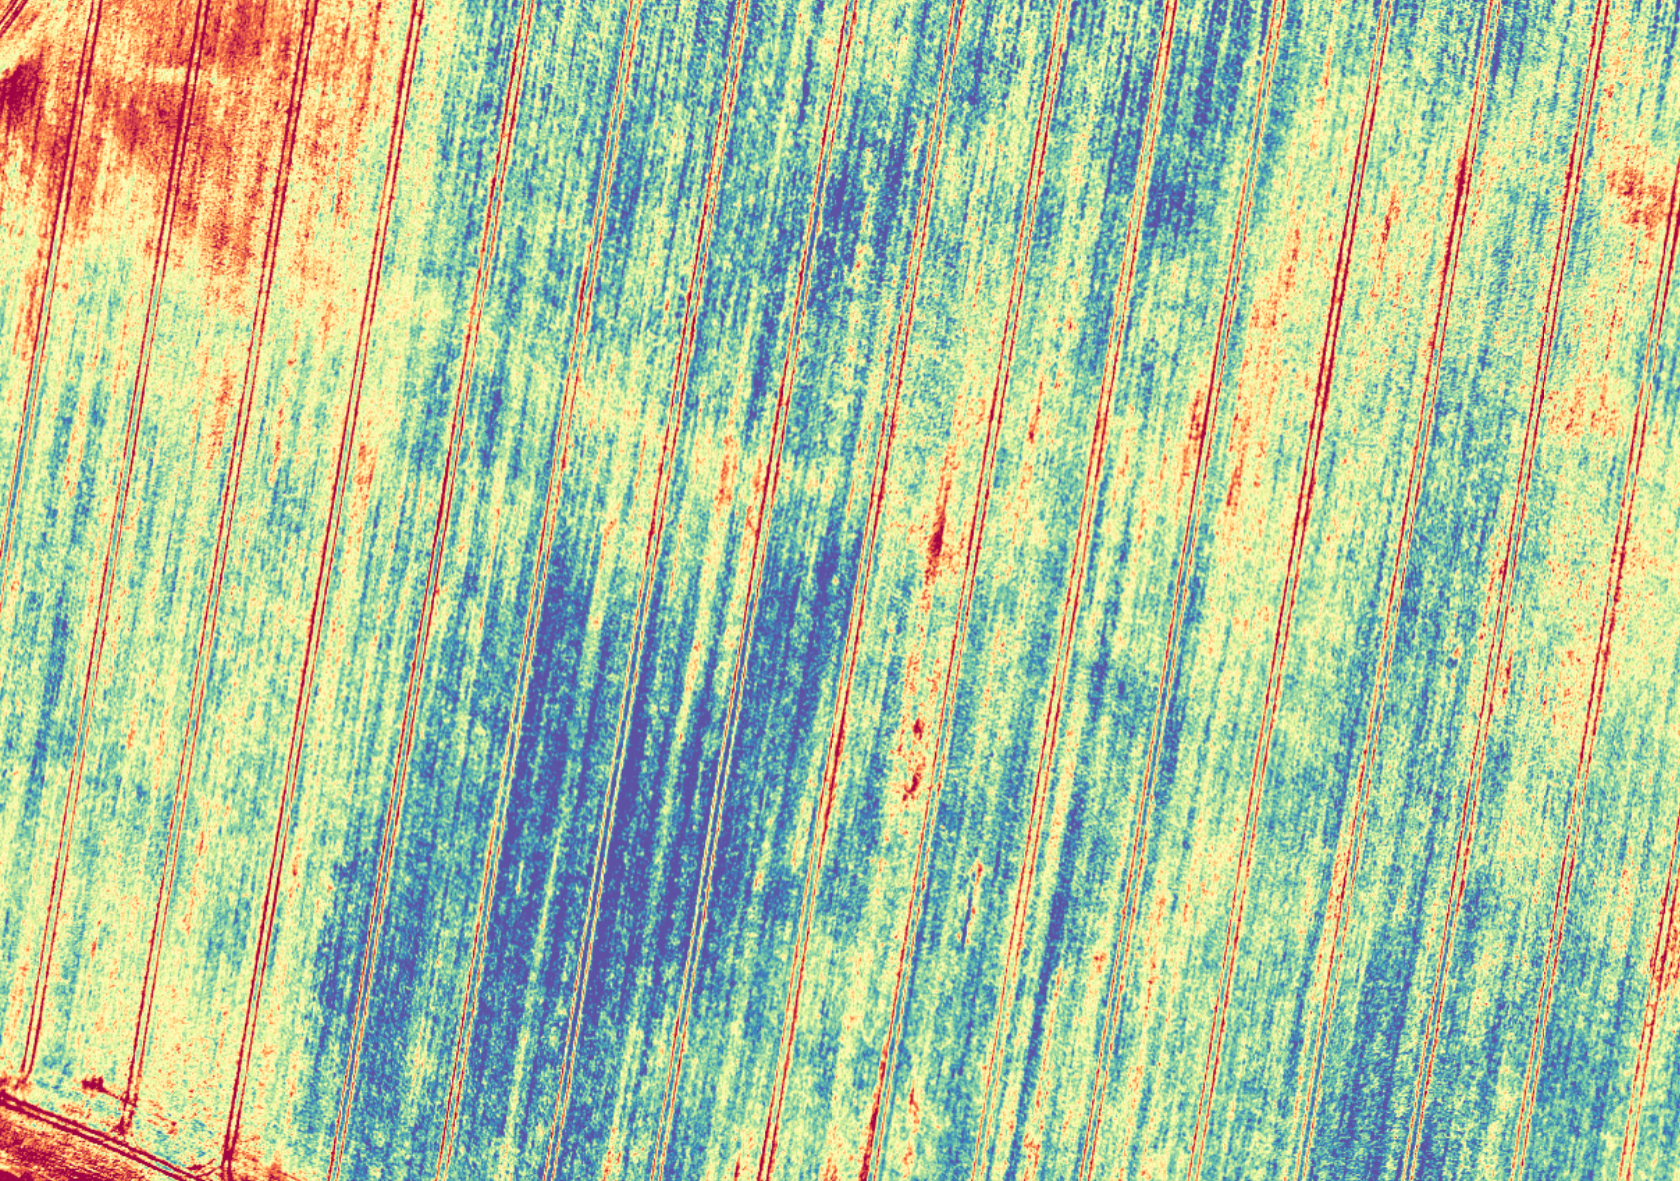 Hyperspectral camera image of crops